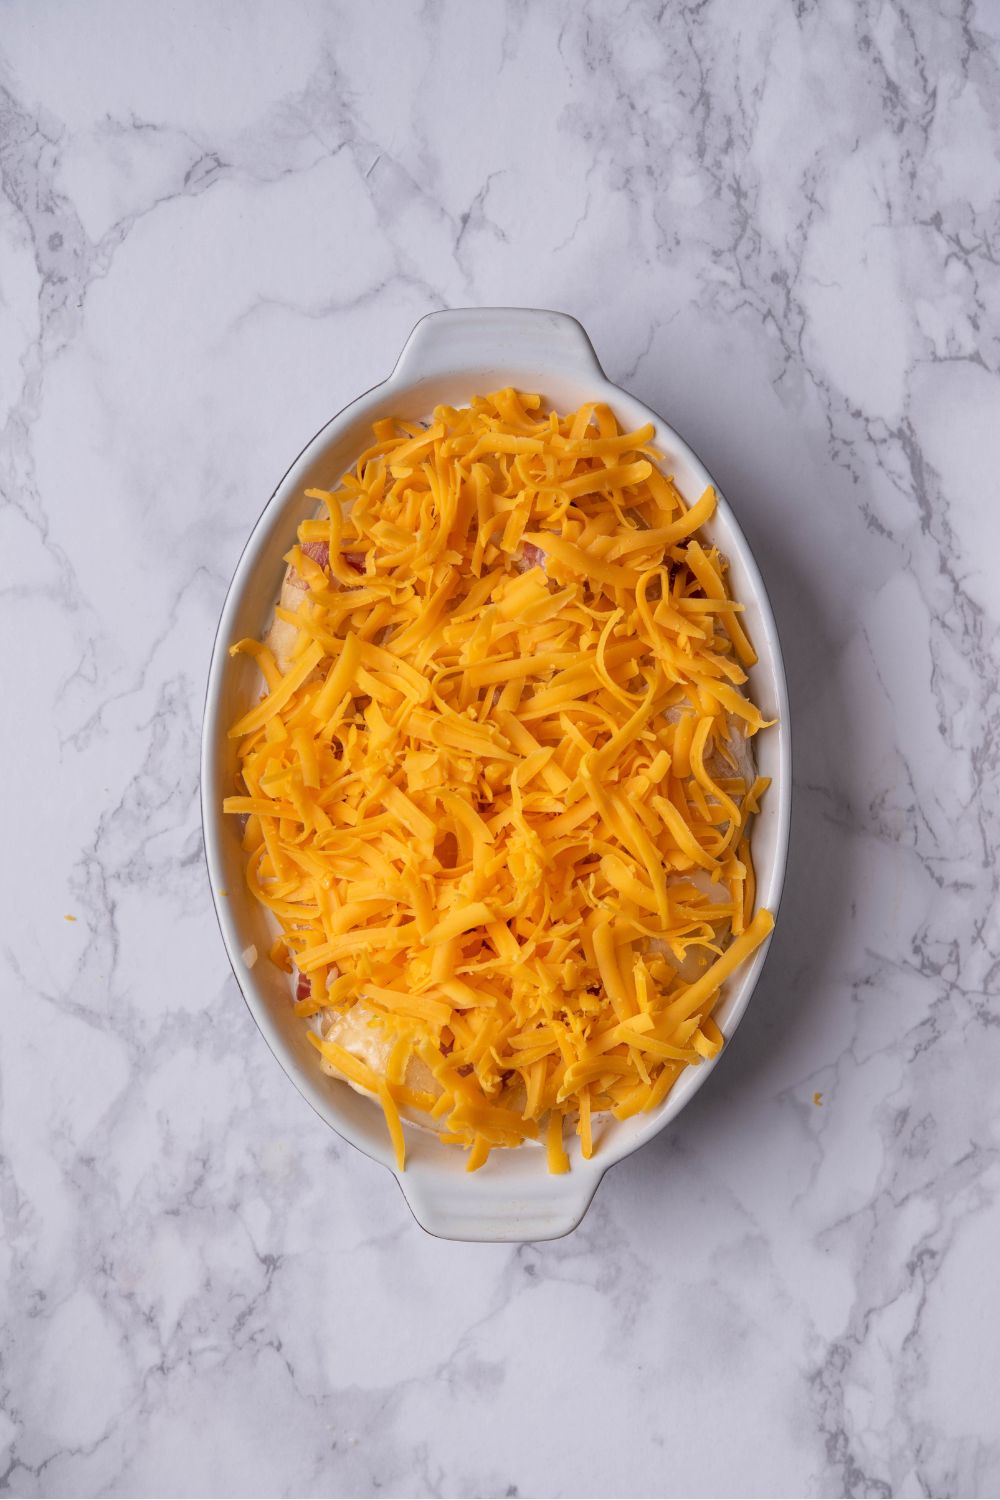 A bunch of shredded cheddar cheese on top of pierogis and a creamy sauce in a casserole dish.